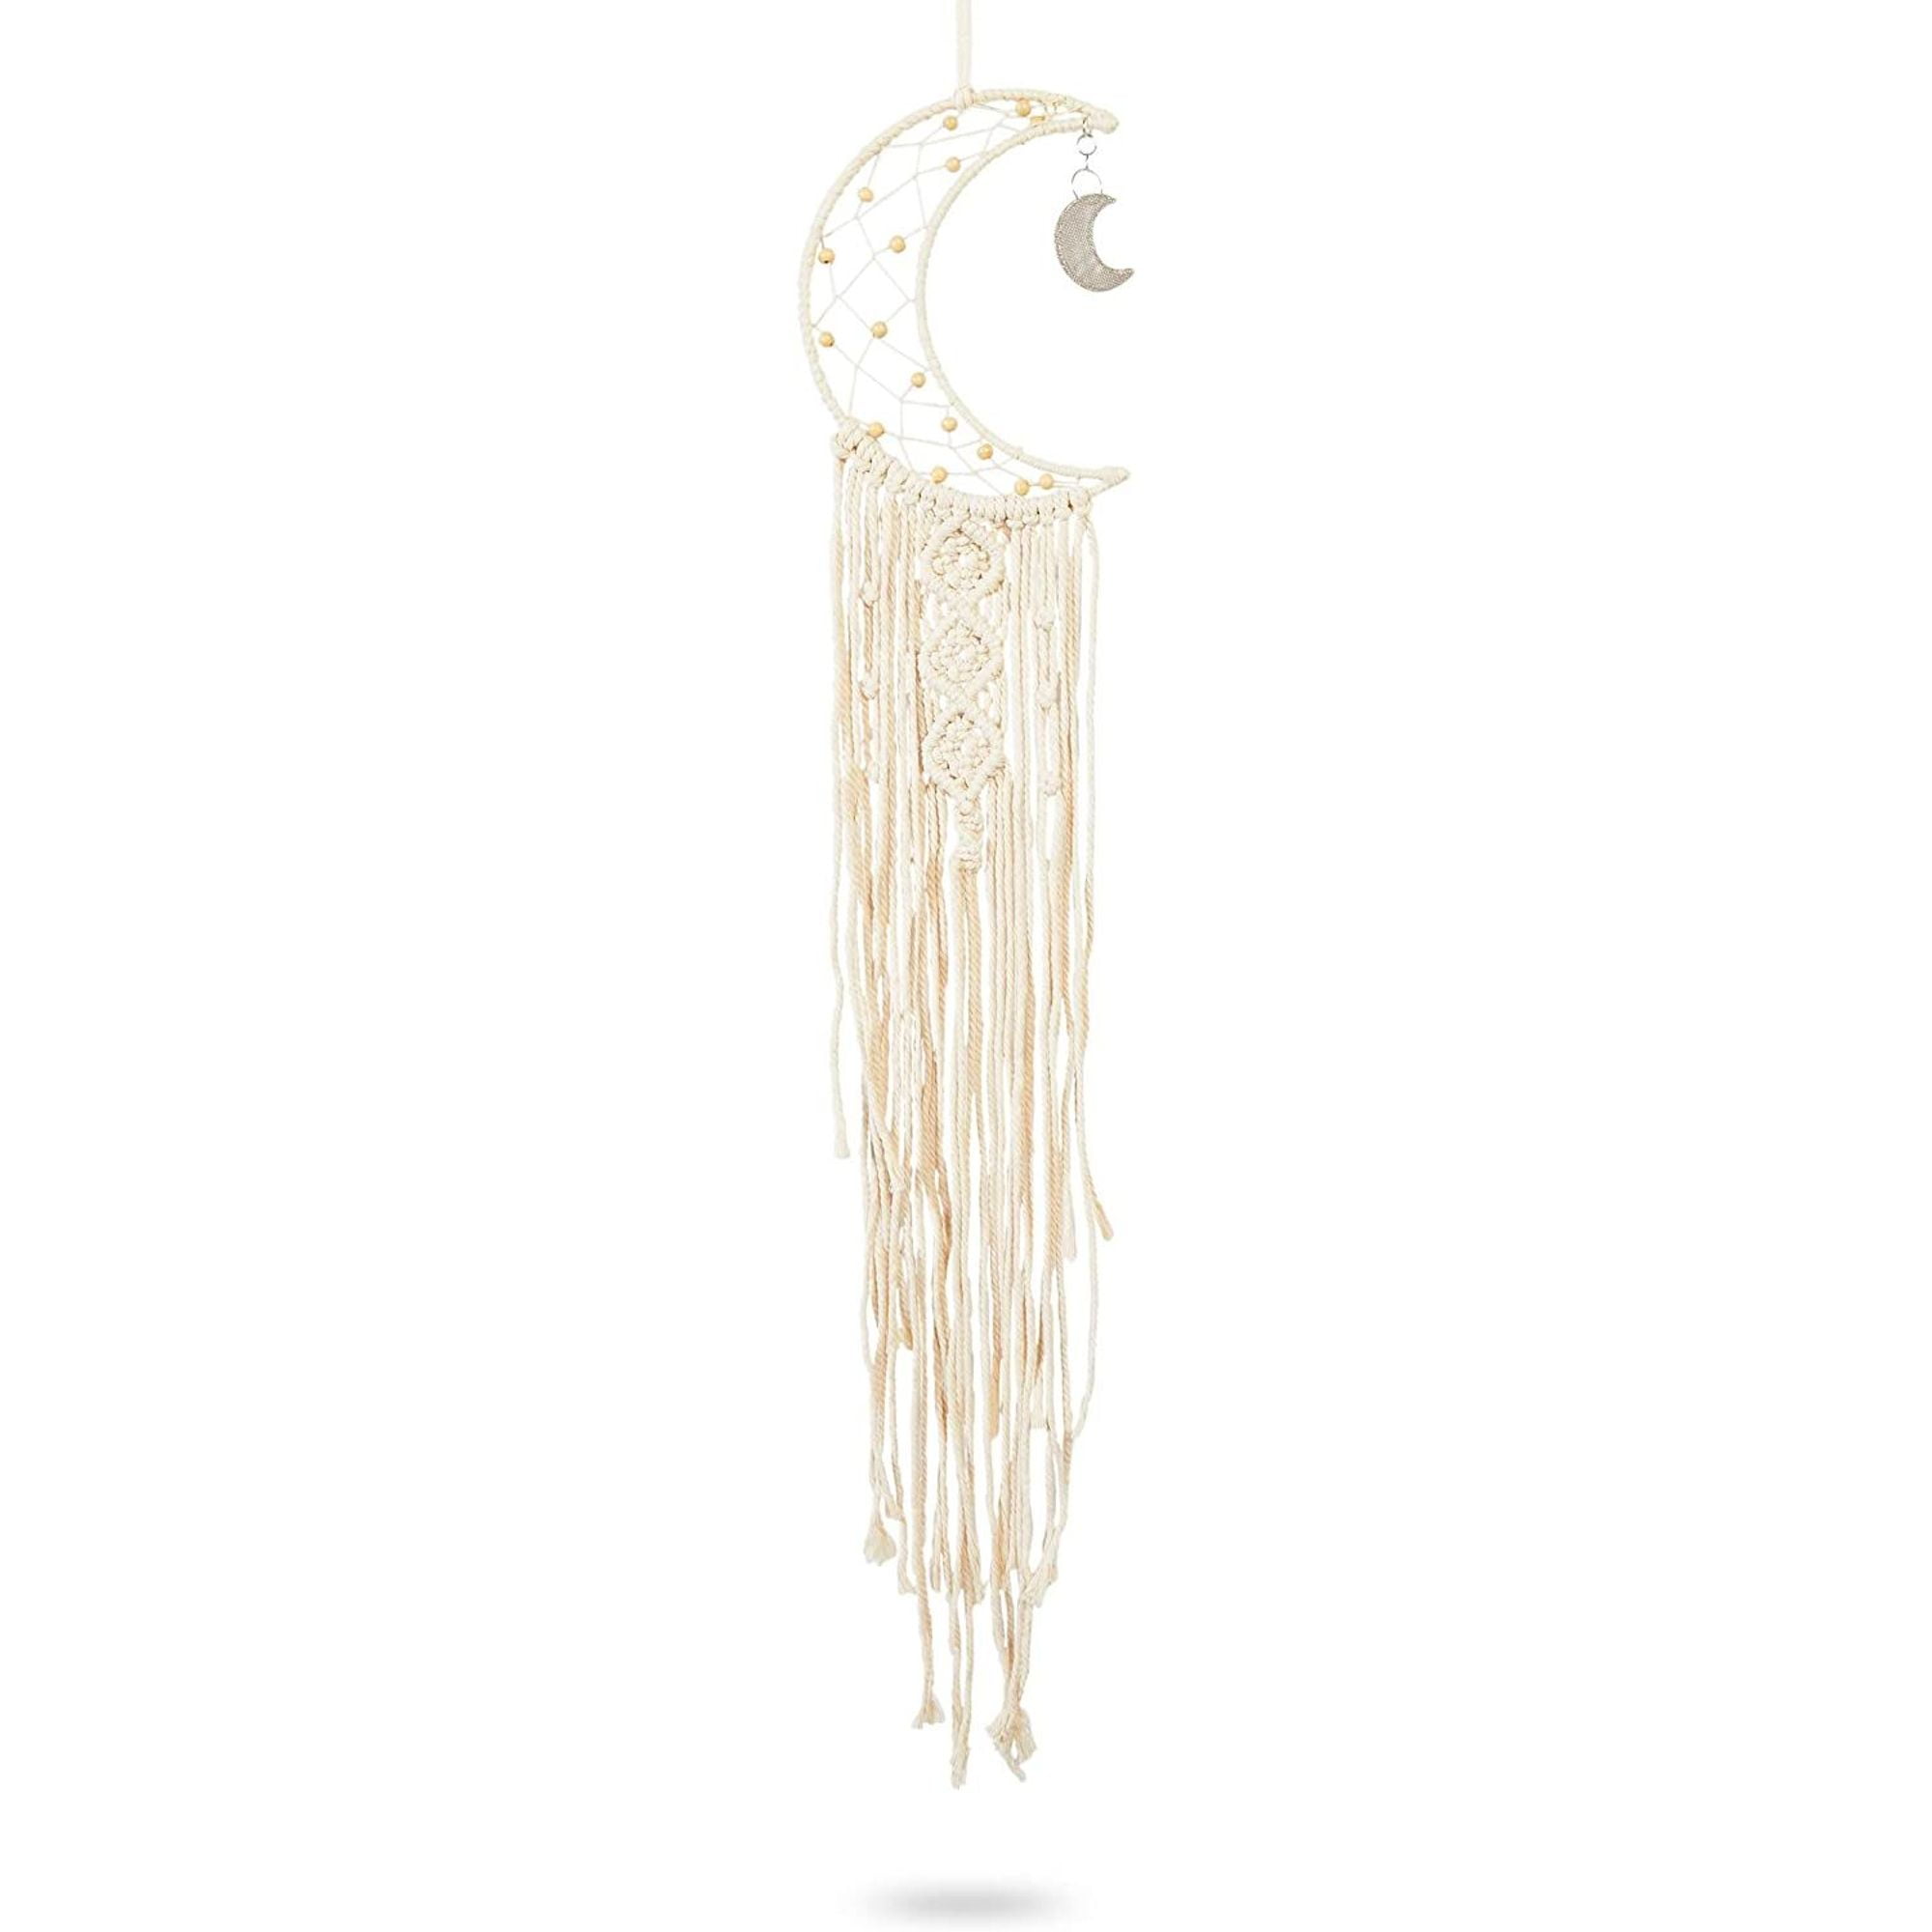 Macrame Wall Hanging with LED Light for Kids Room Party Ornaments Craft Gifts HIAHA Wall Hanging Moon Dream Catcher 